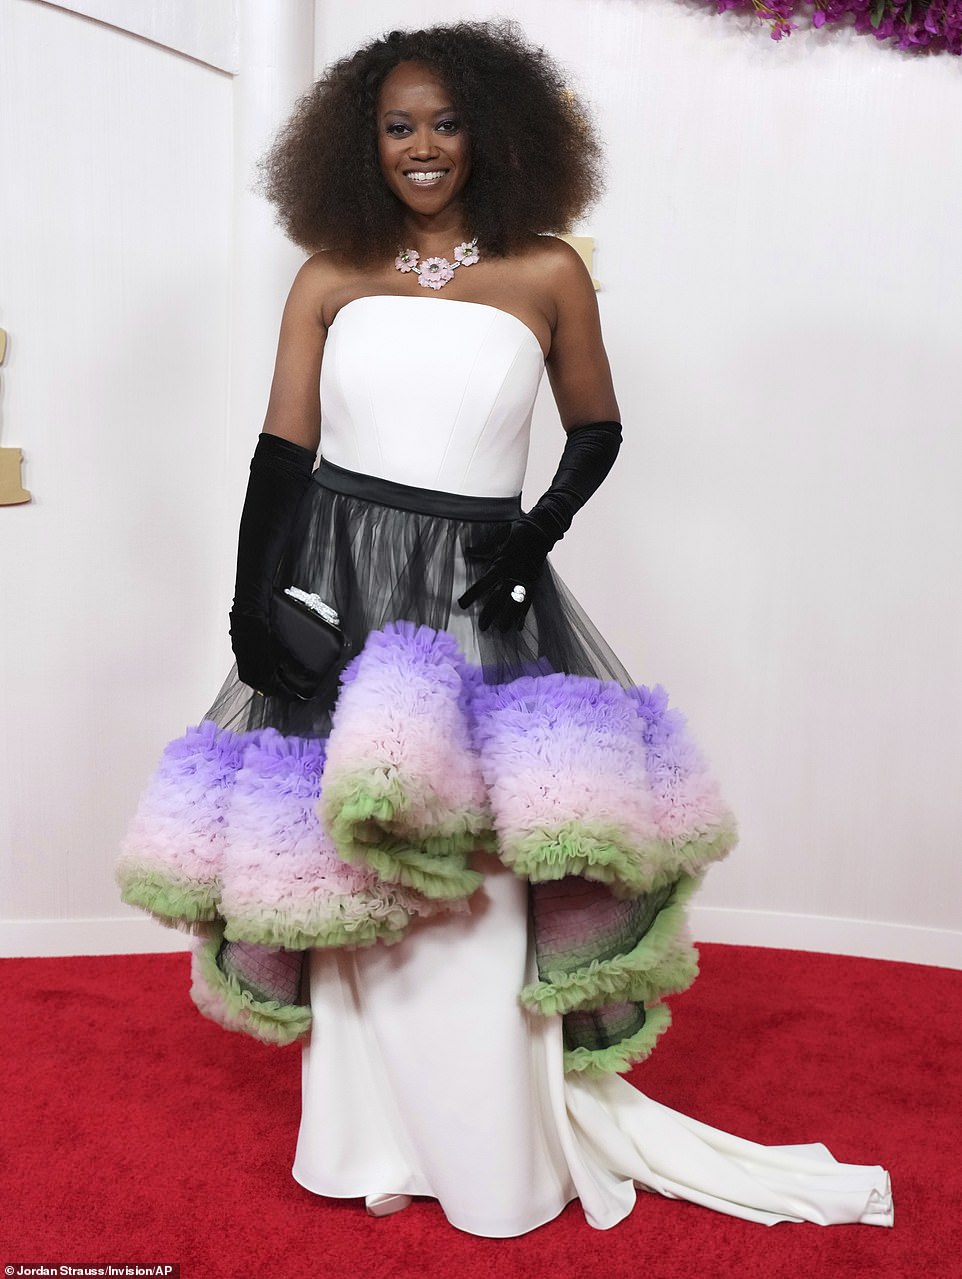 Cosby Show star Erika Alexander wore what would have been a very elegant white dress - had it not been for the huge black, purple, pink and green tutu-style skirt that cinched around her waist